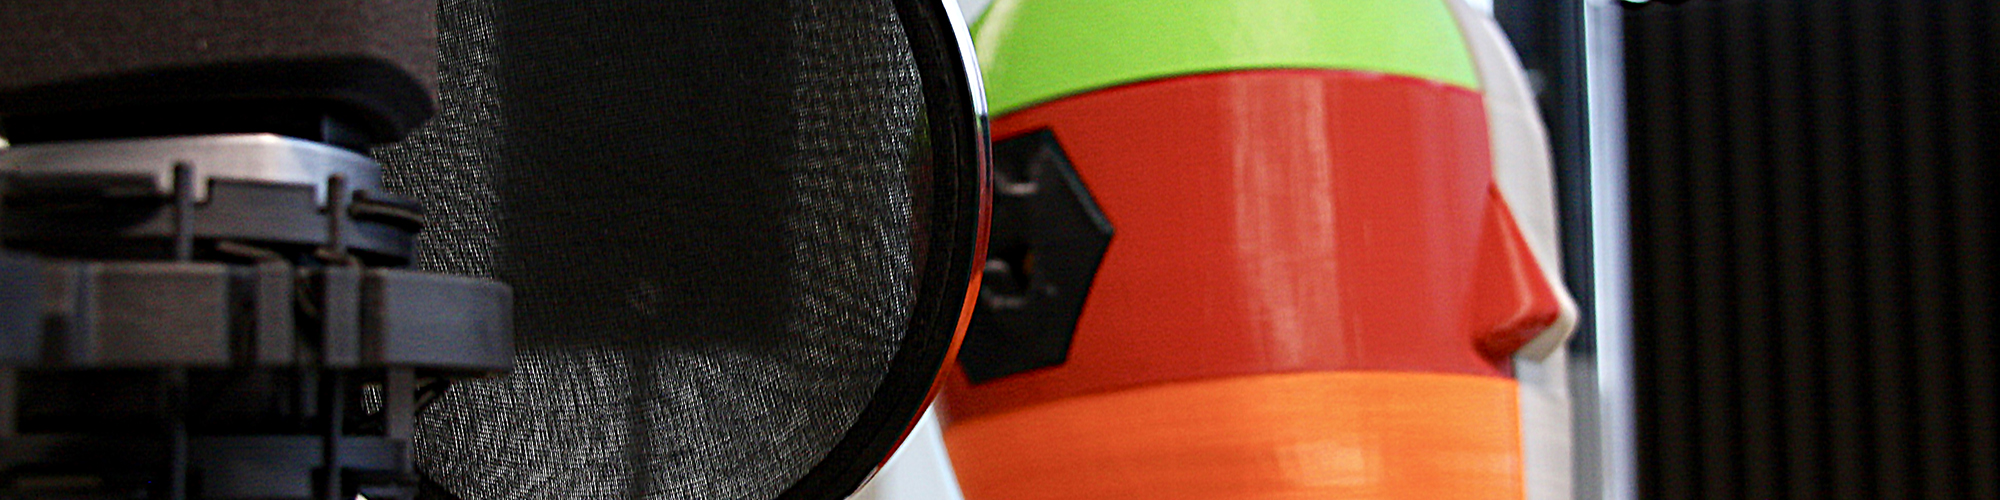 Close-up of professional studio microphone with colourful, 3D printed listening dummy behind